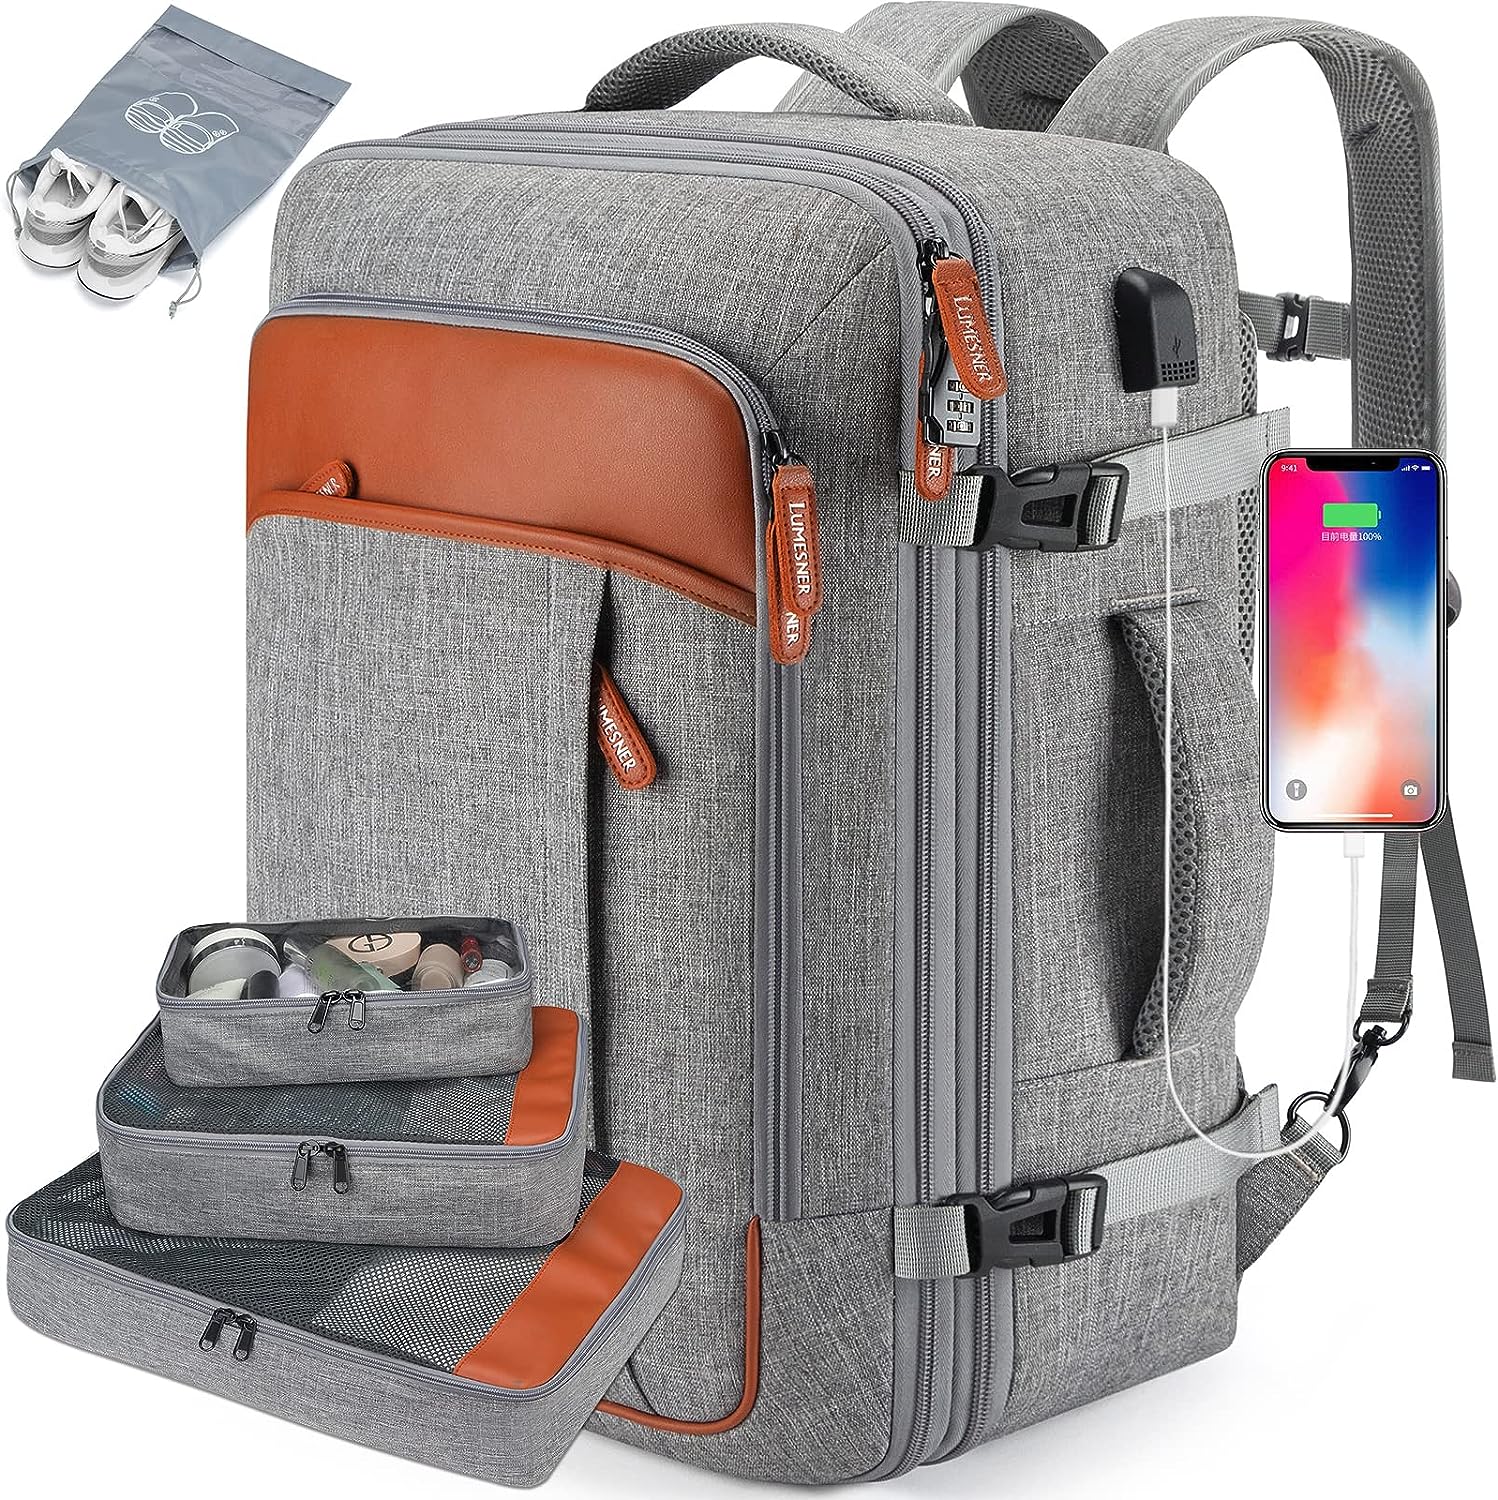 Carry on Travel Backpack-The Best Gifts For Travelers